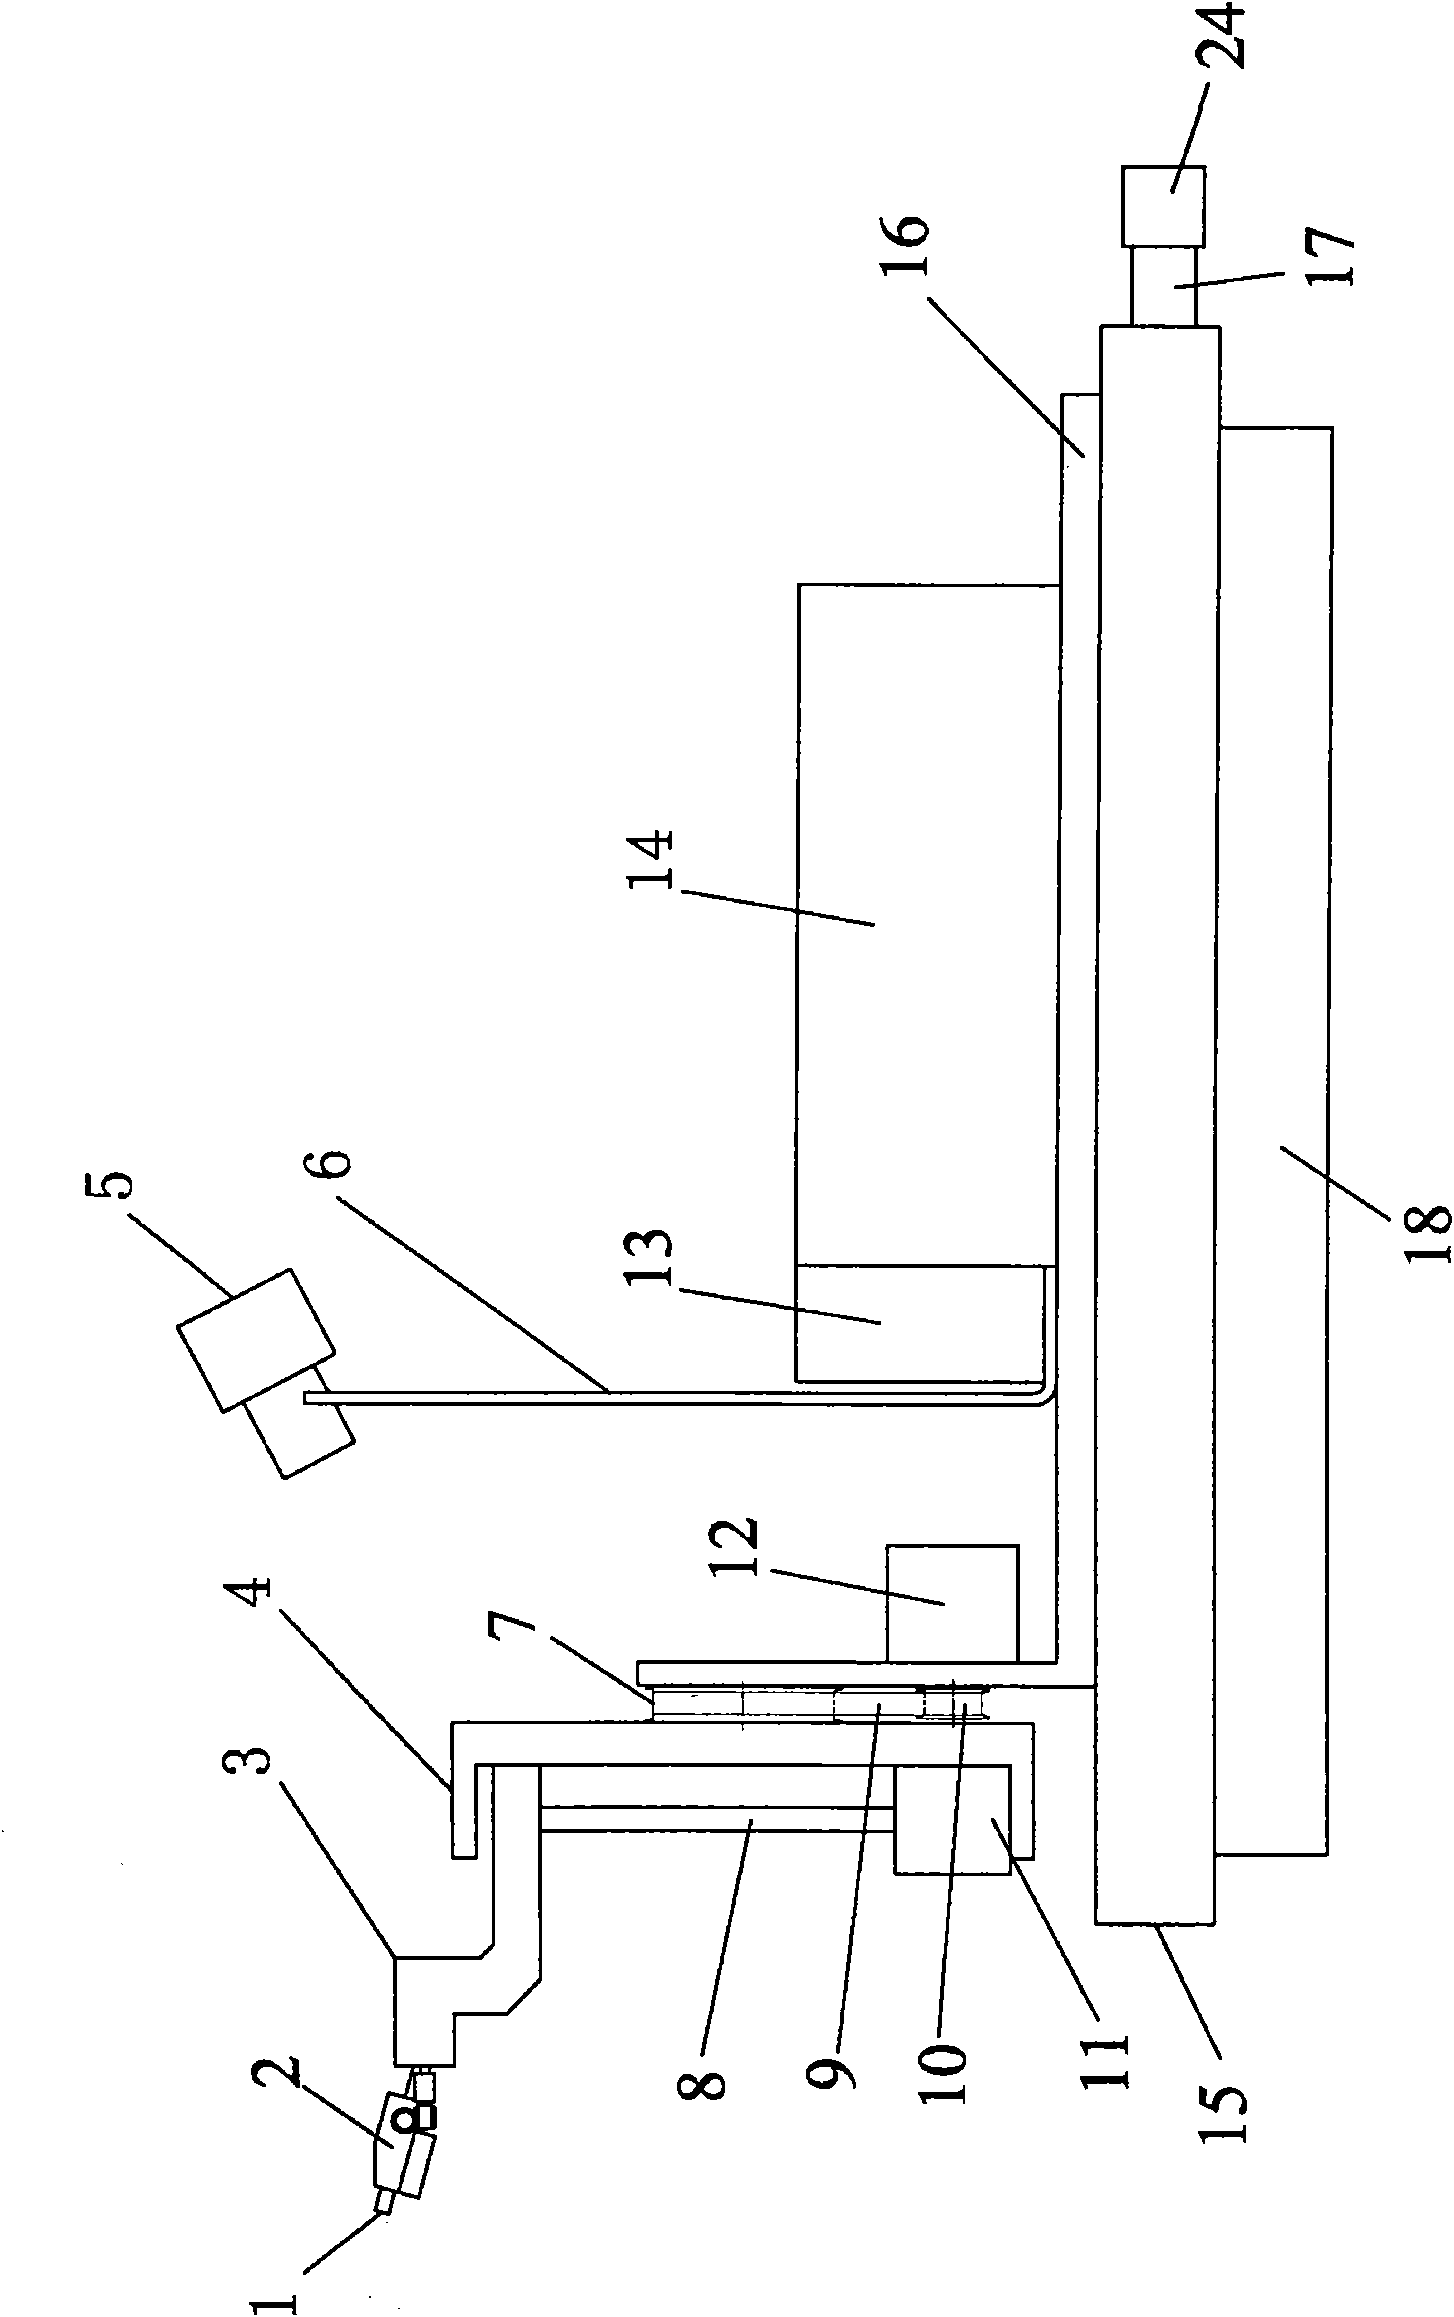 Four-dimensional self-adaptive insulation piece surface charge measuring device